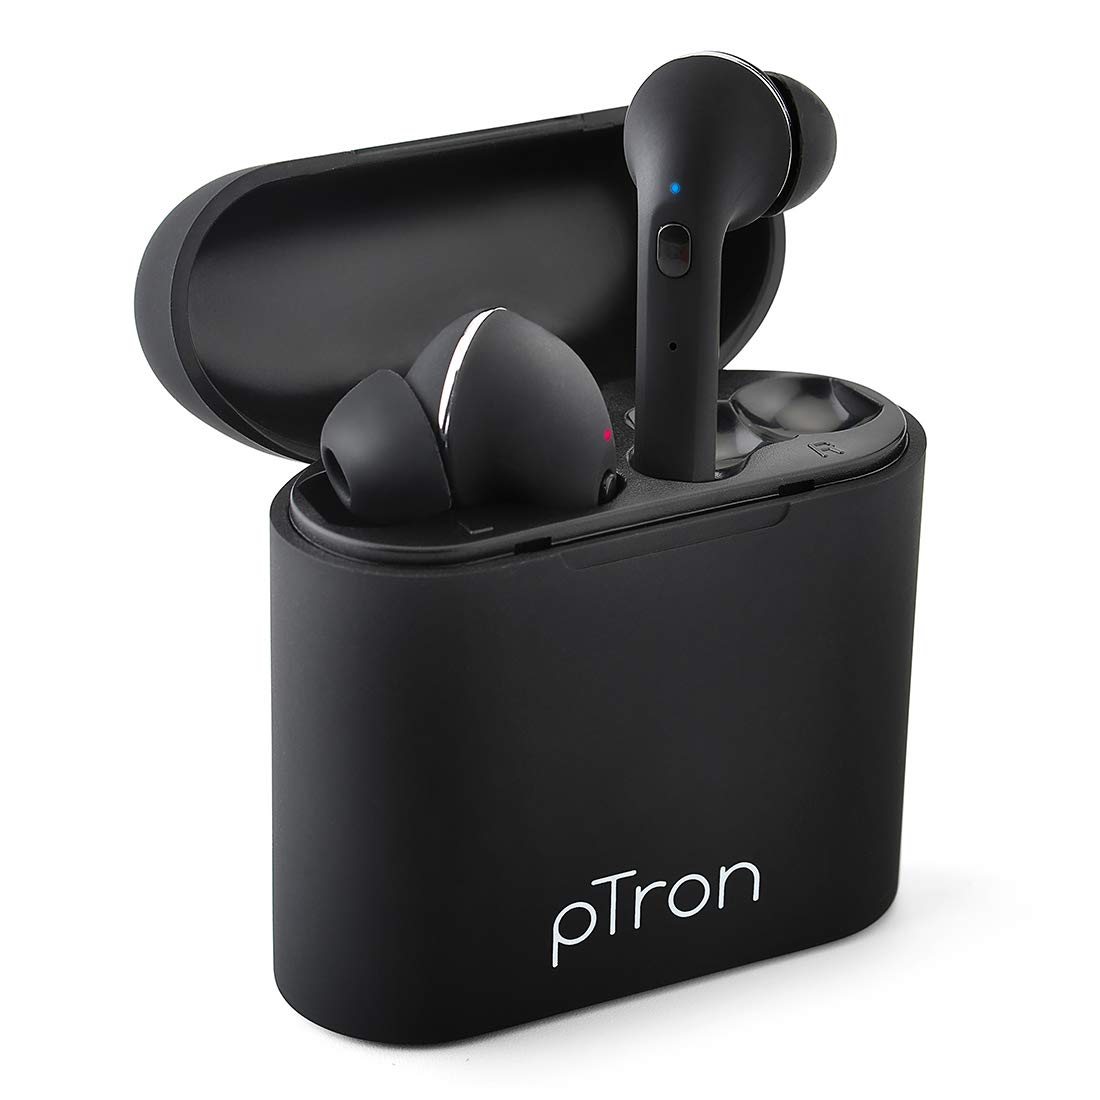 pTron Bassbuds Lite V2 In-Ear True Wireless Bluetooth 5.0 Headphones with HiFi Deep Bass, Total 20Hrs Playtime, Ergonomic Sweatproof Earbuds, Noise Isolation, Built-in Mic